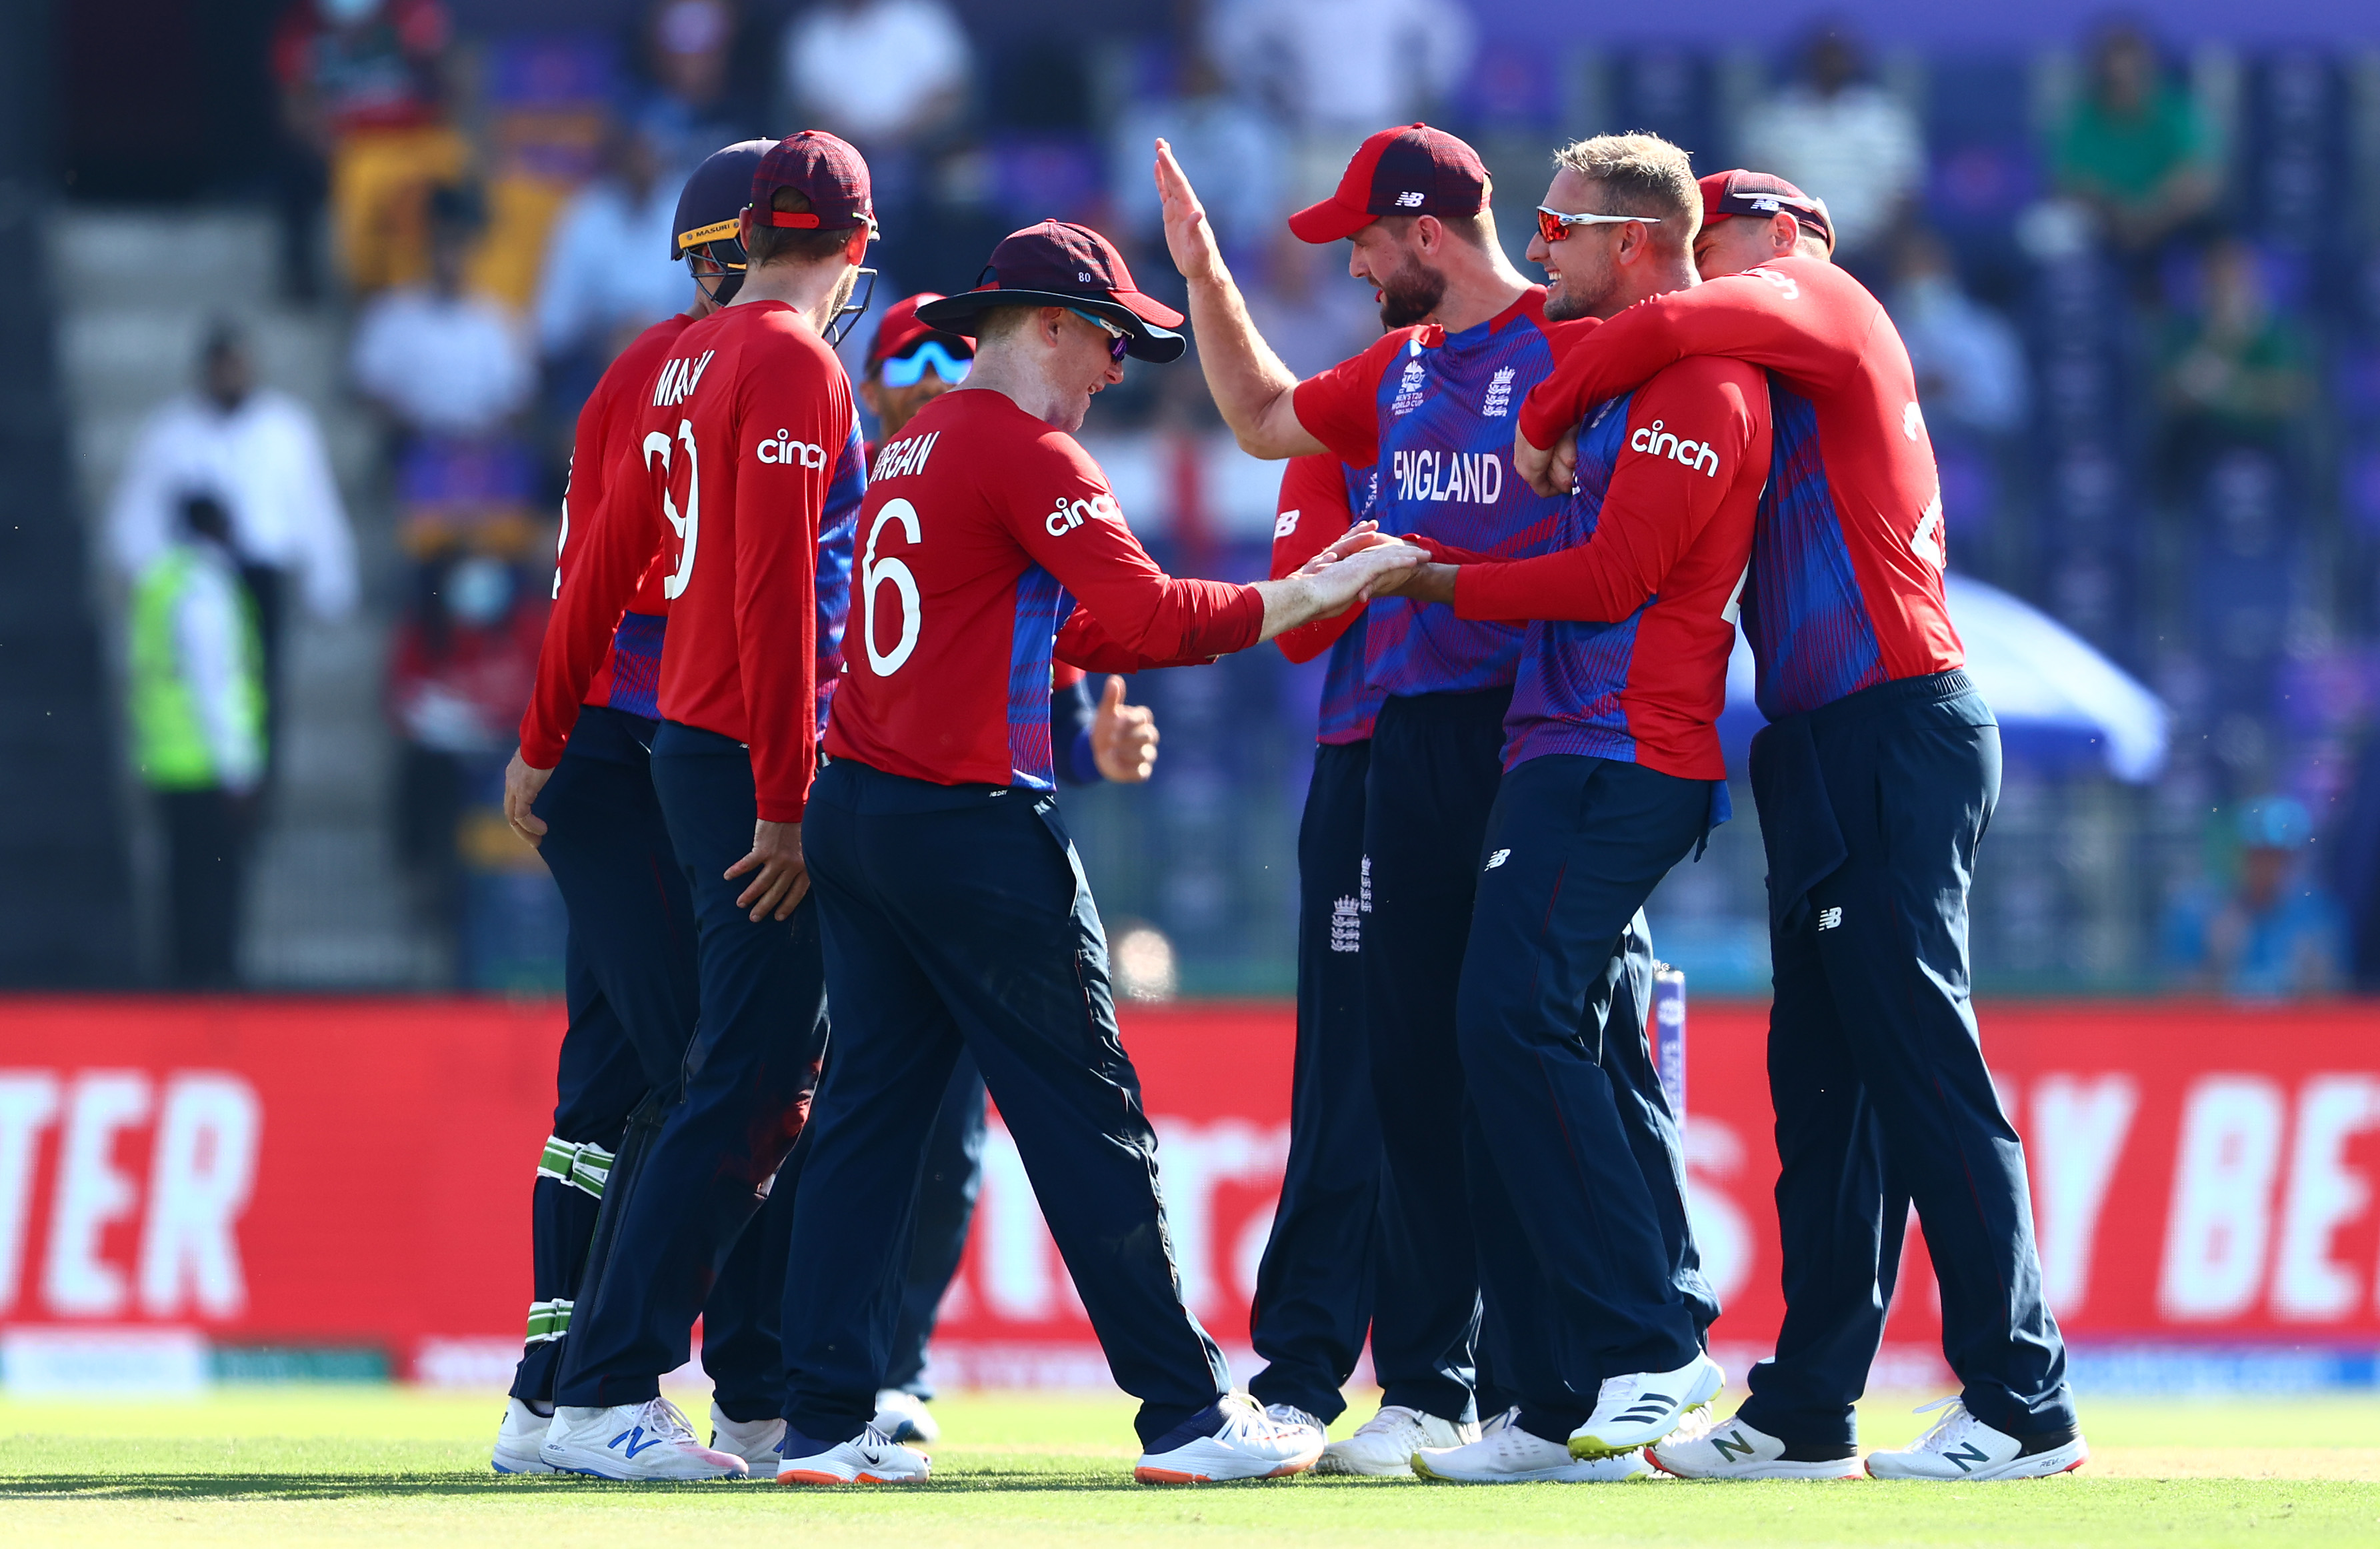 England to play seven T20Is in 2022 tour of Pakistan